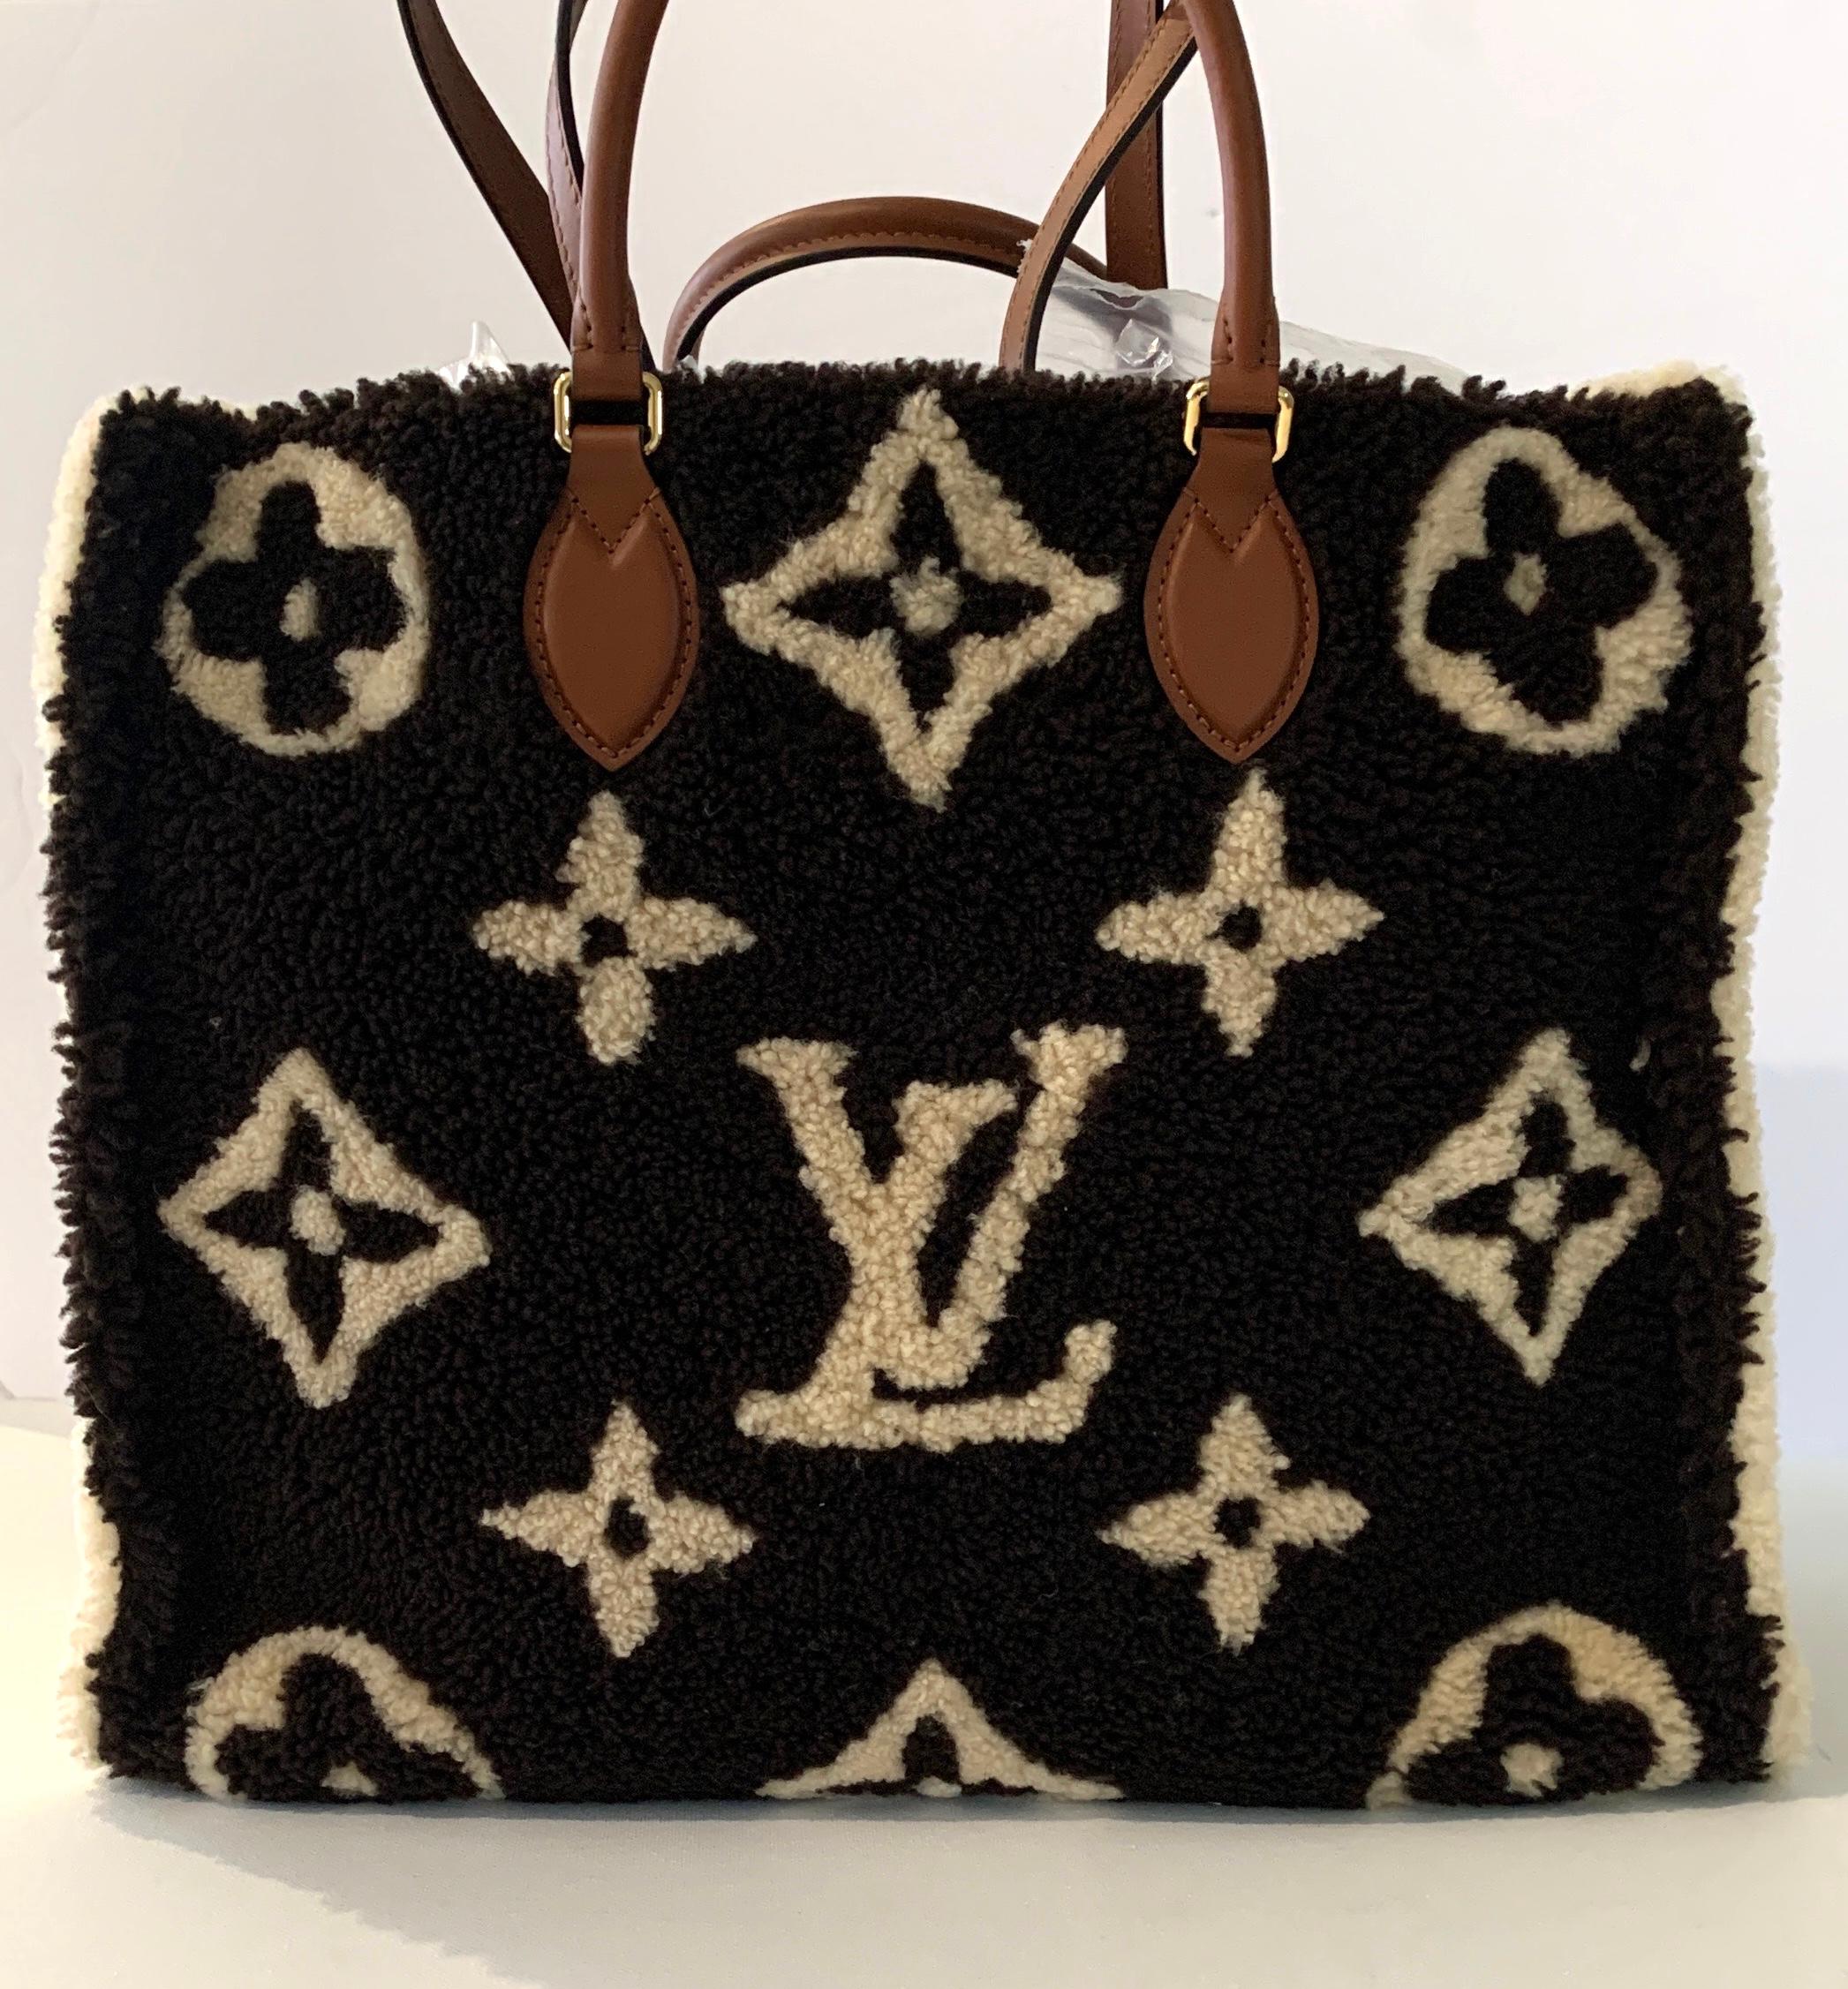 Louis Vuitton 
Onthego Tote Bag
Shearling
Teddy
This soldout immediately
What a great bag!
 
GIANT MONOGRAM
Speedy - Monogram Giant - Teddy
 
Louis Vuitton invites you to experience its limited edition collection: Monogram Giant Teddy
 
Monogram